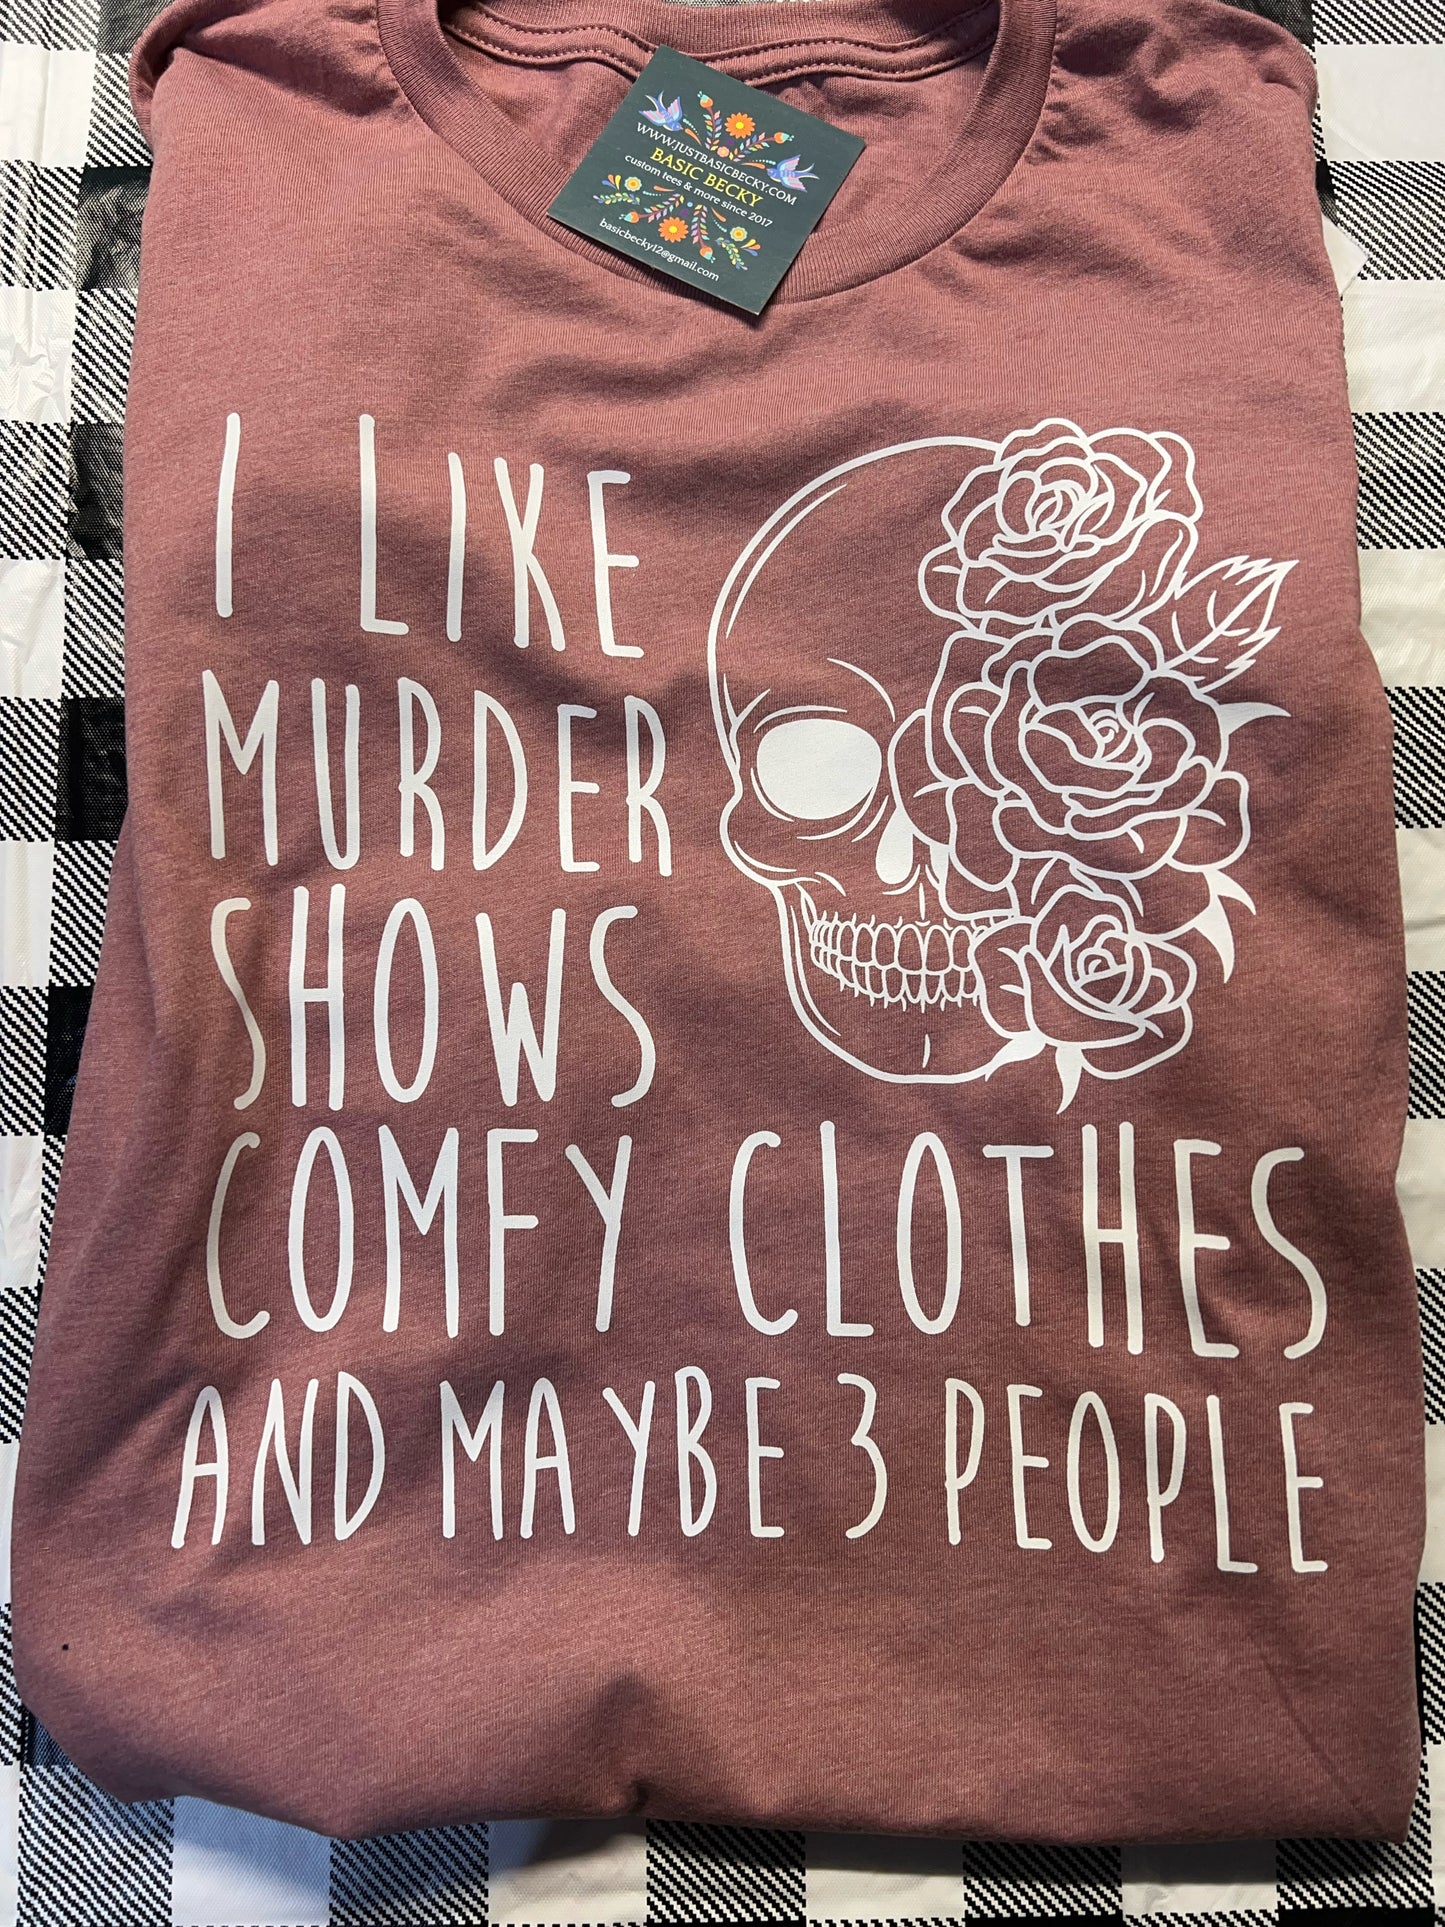 I LIKE MURDER SHOWS COMFY CLOTHES AND MAYBE 3 PEOPLE